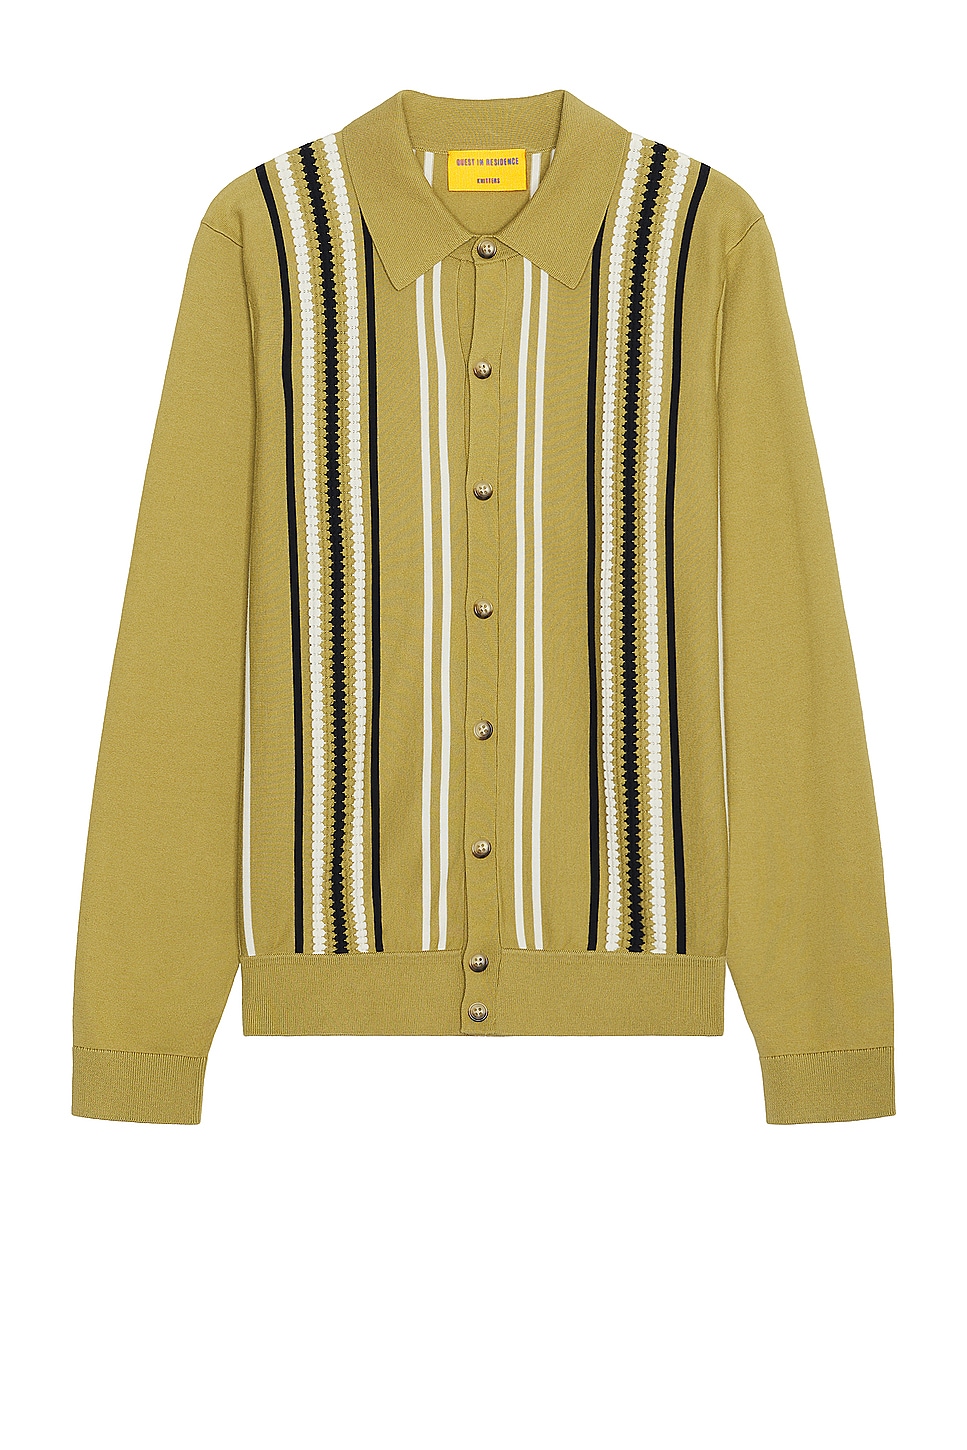 Image 1 of Guest In Residence Stripe Plaza Shirt in Olive, Cream, & Midnight